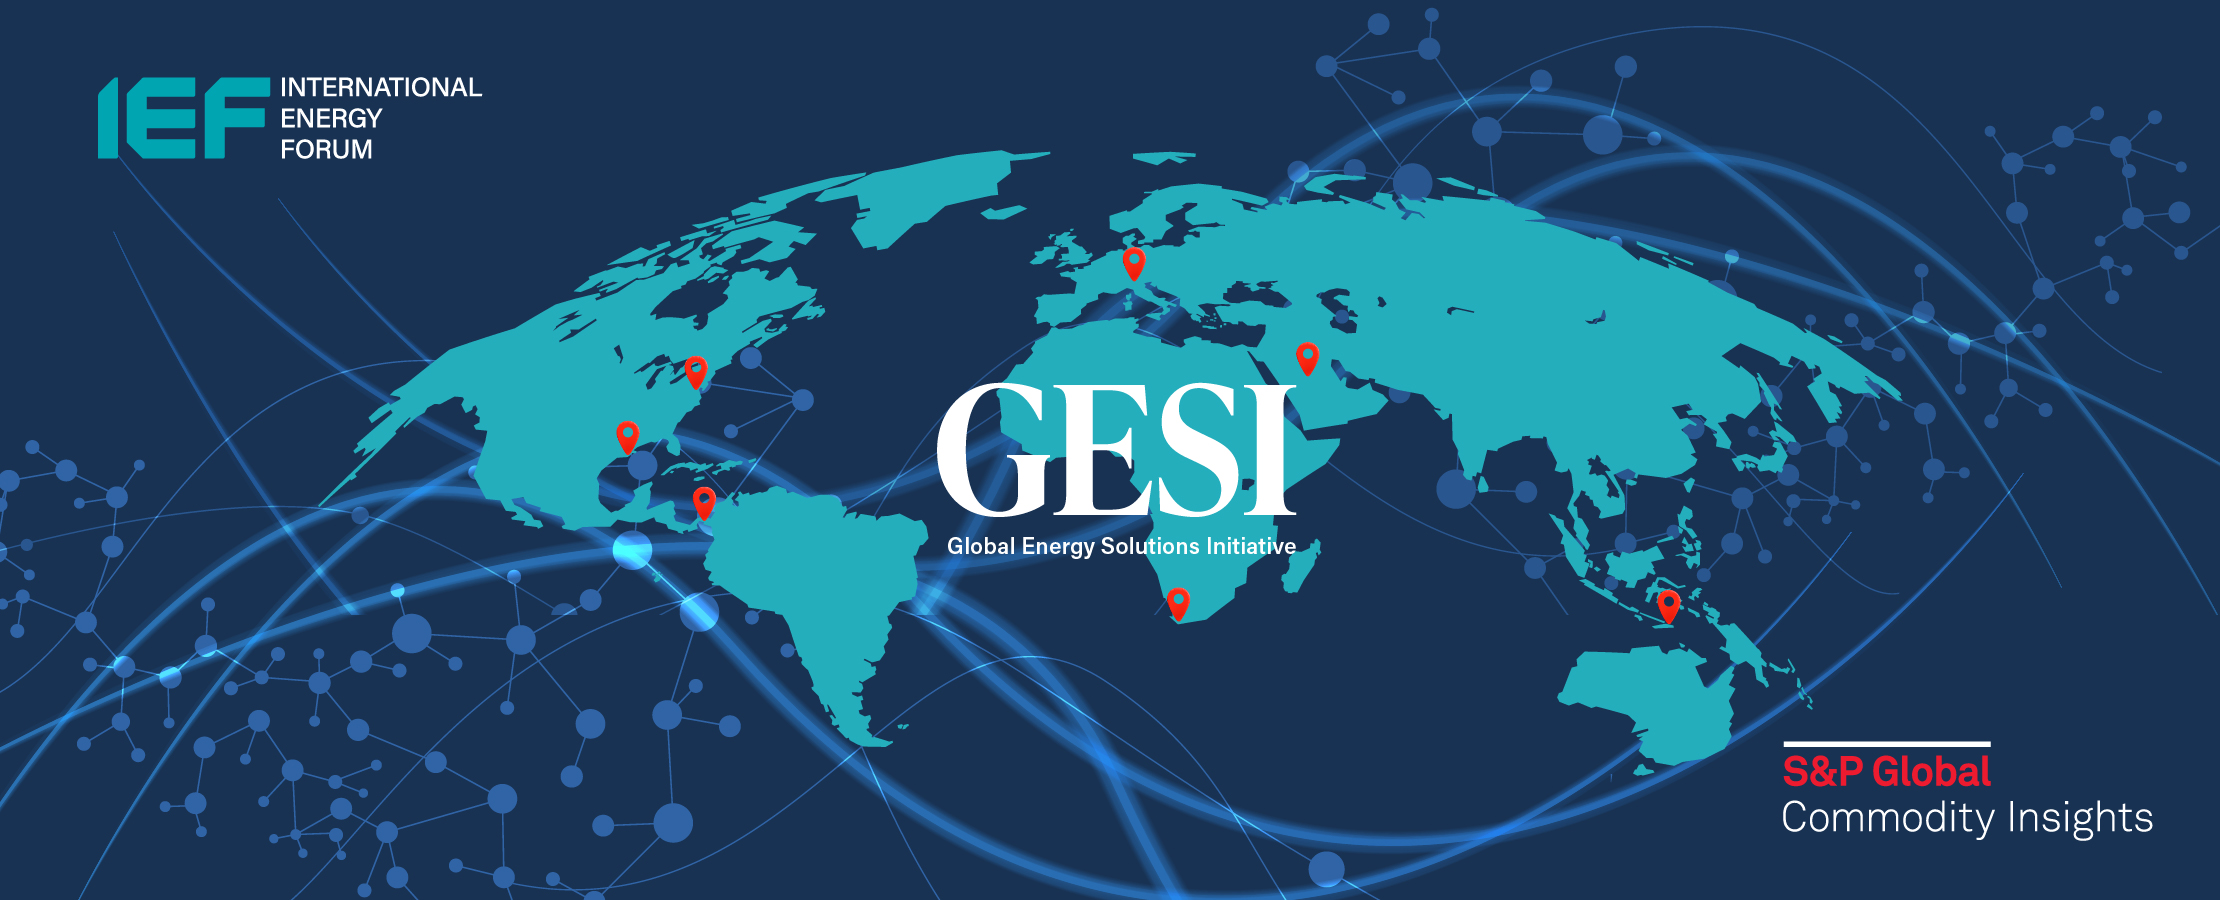 IEF Global Energy Solutions Initiative